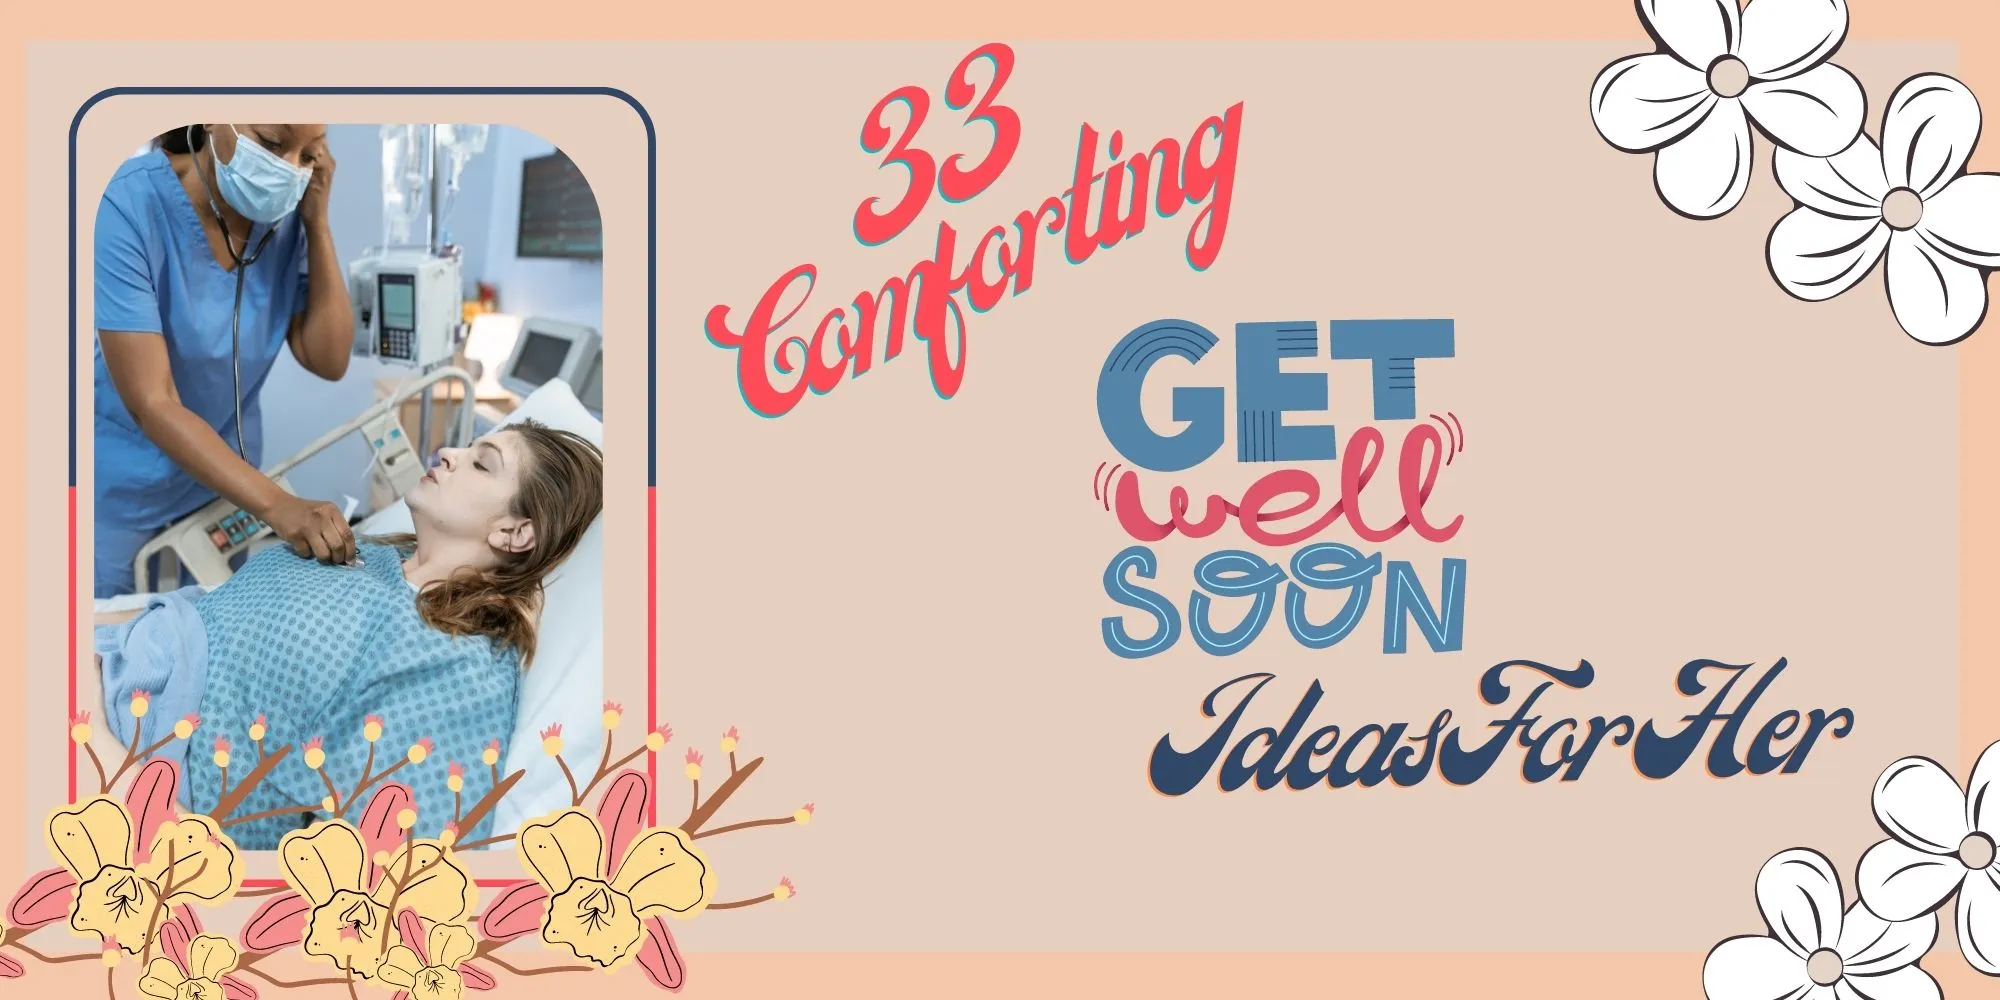 Get Well Soon Gift Ideas For Her